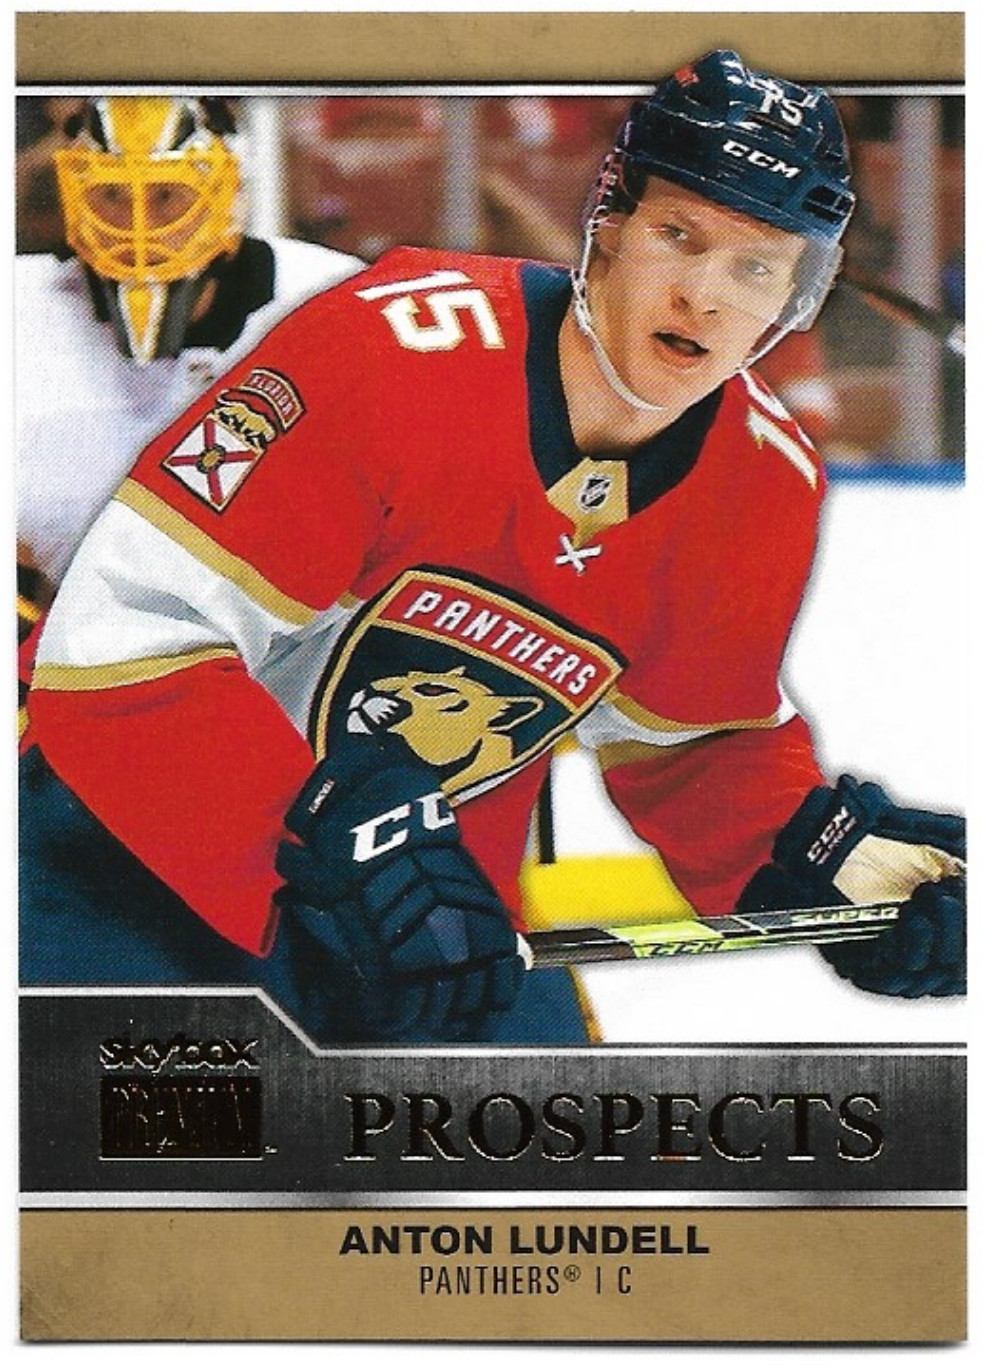 Rookie Skybox Premium Prospects ANTON LUNDELL 21-22 UD Metal Universe